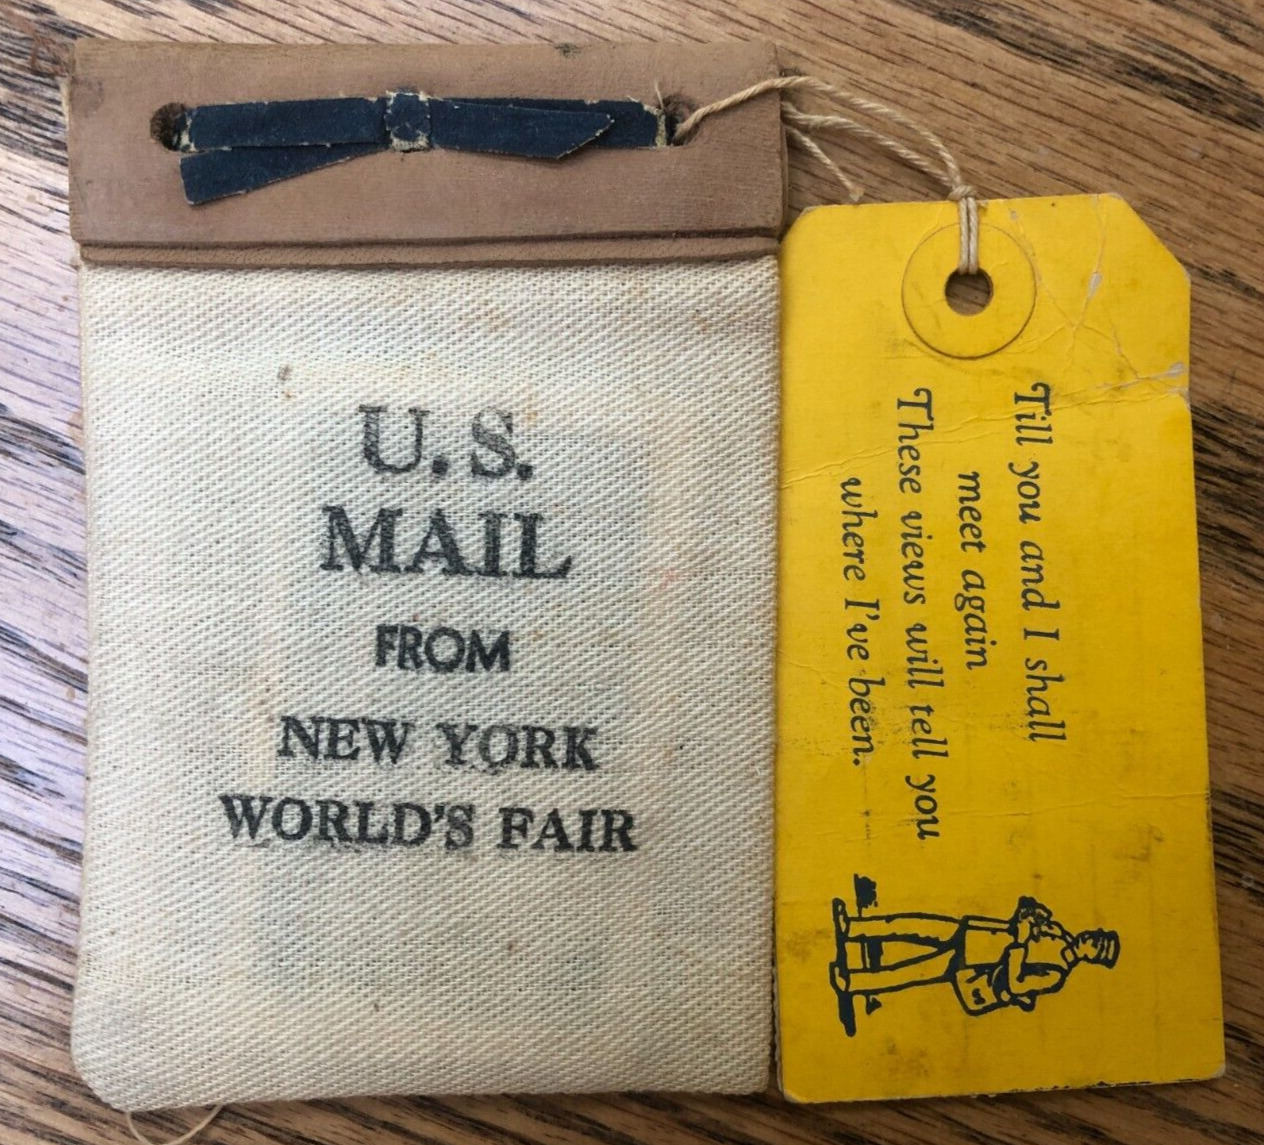 1939-40 NY World's Fair Mini Sealed Souvenir U.S. Mail Bag with Stamps Inside